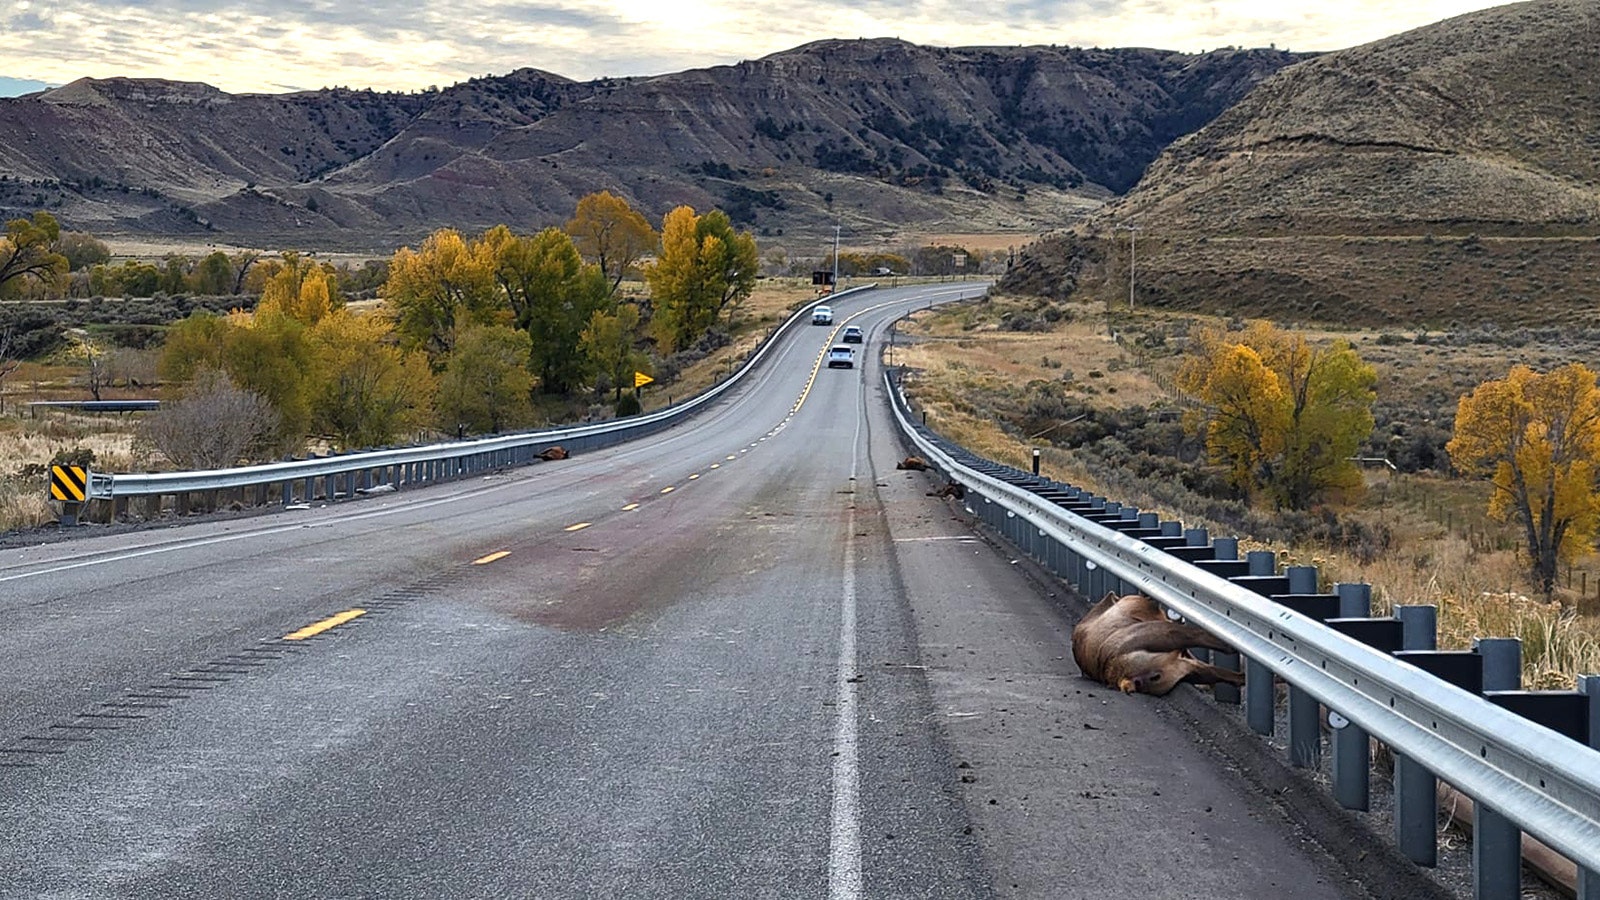 Elk carcasses were strewn across Highway 120 Sunday after a truck couldn't avoid a herd on the road.